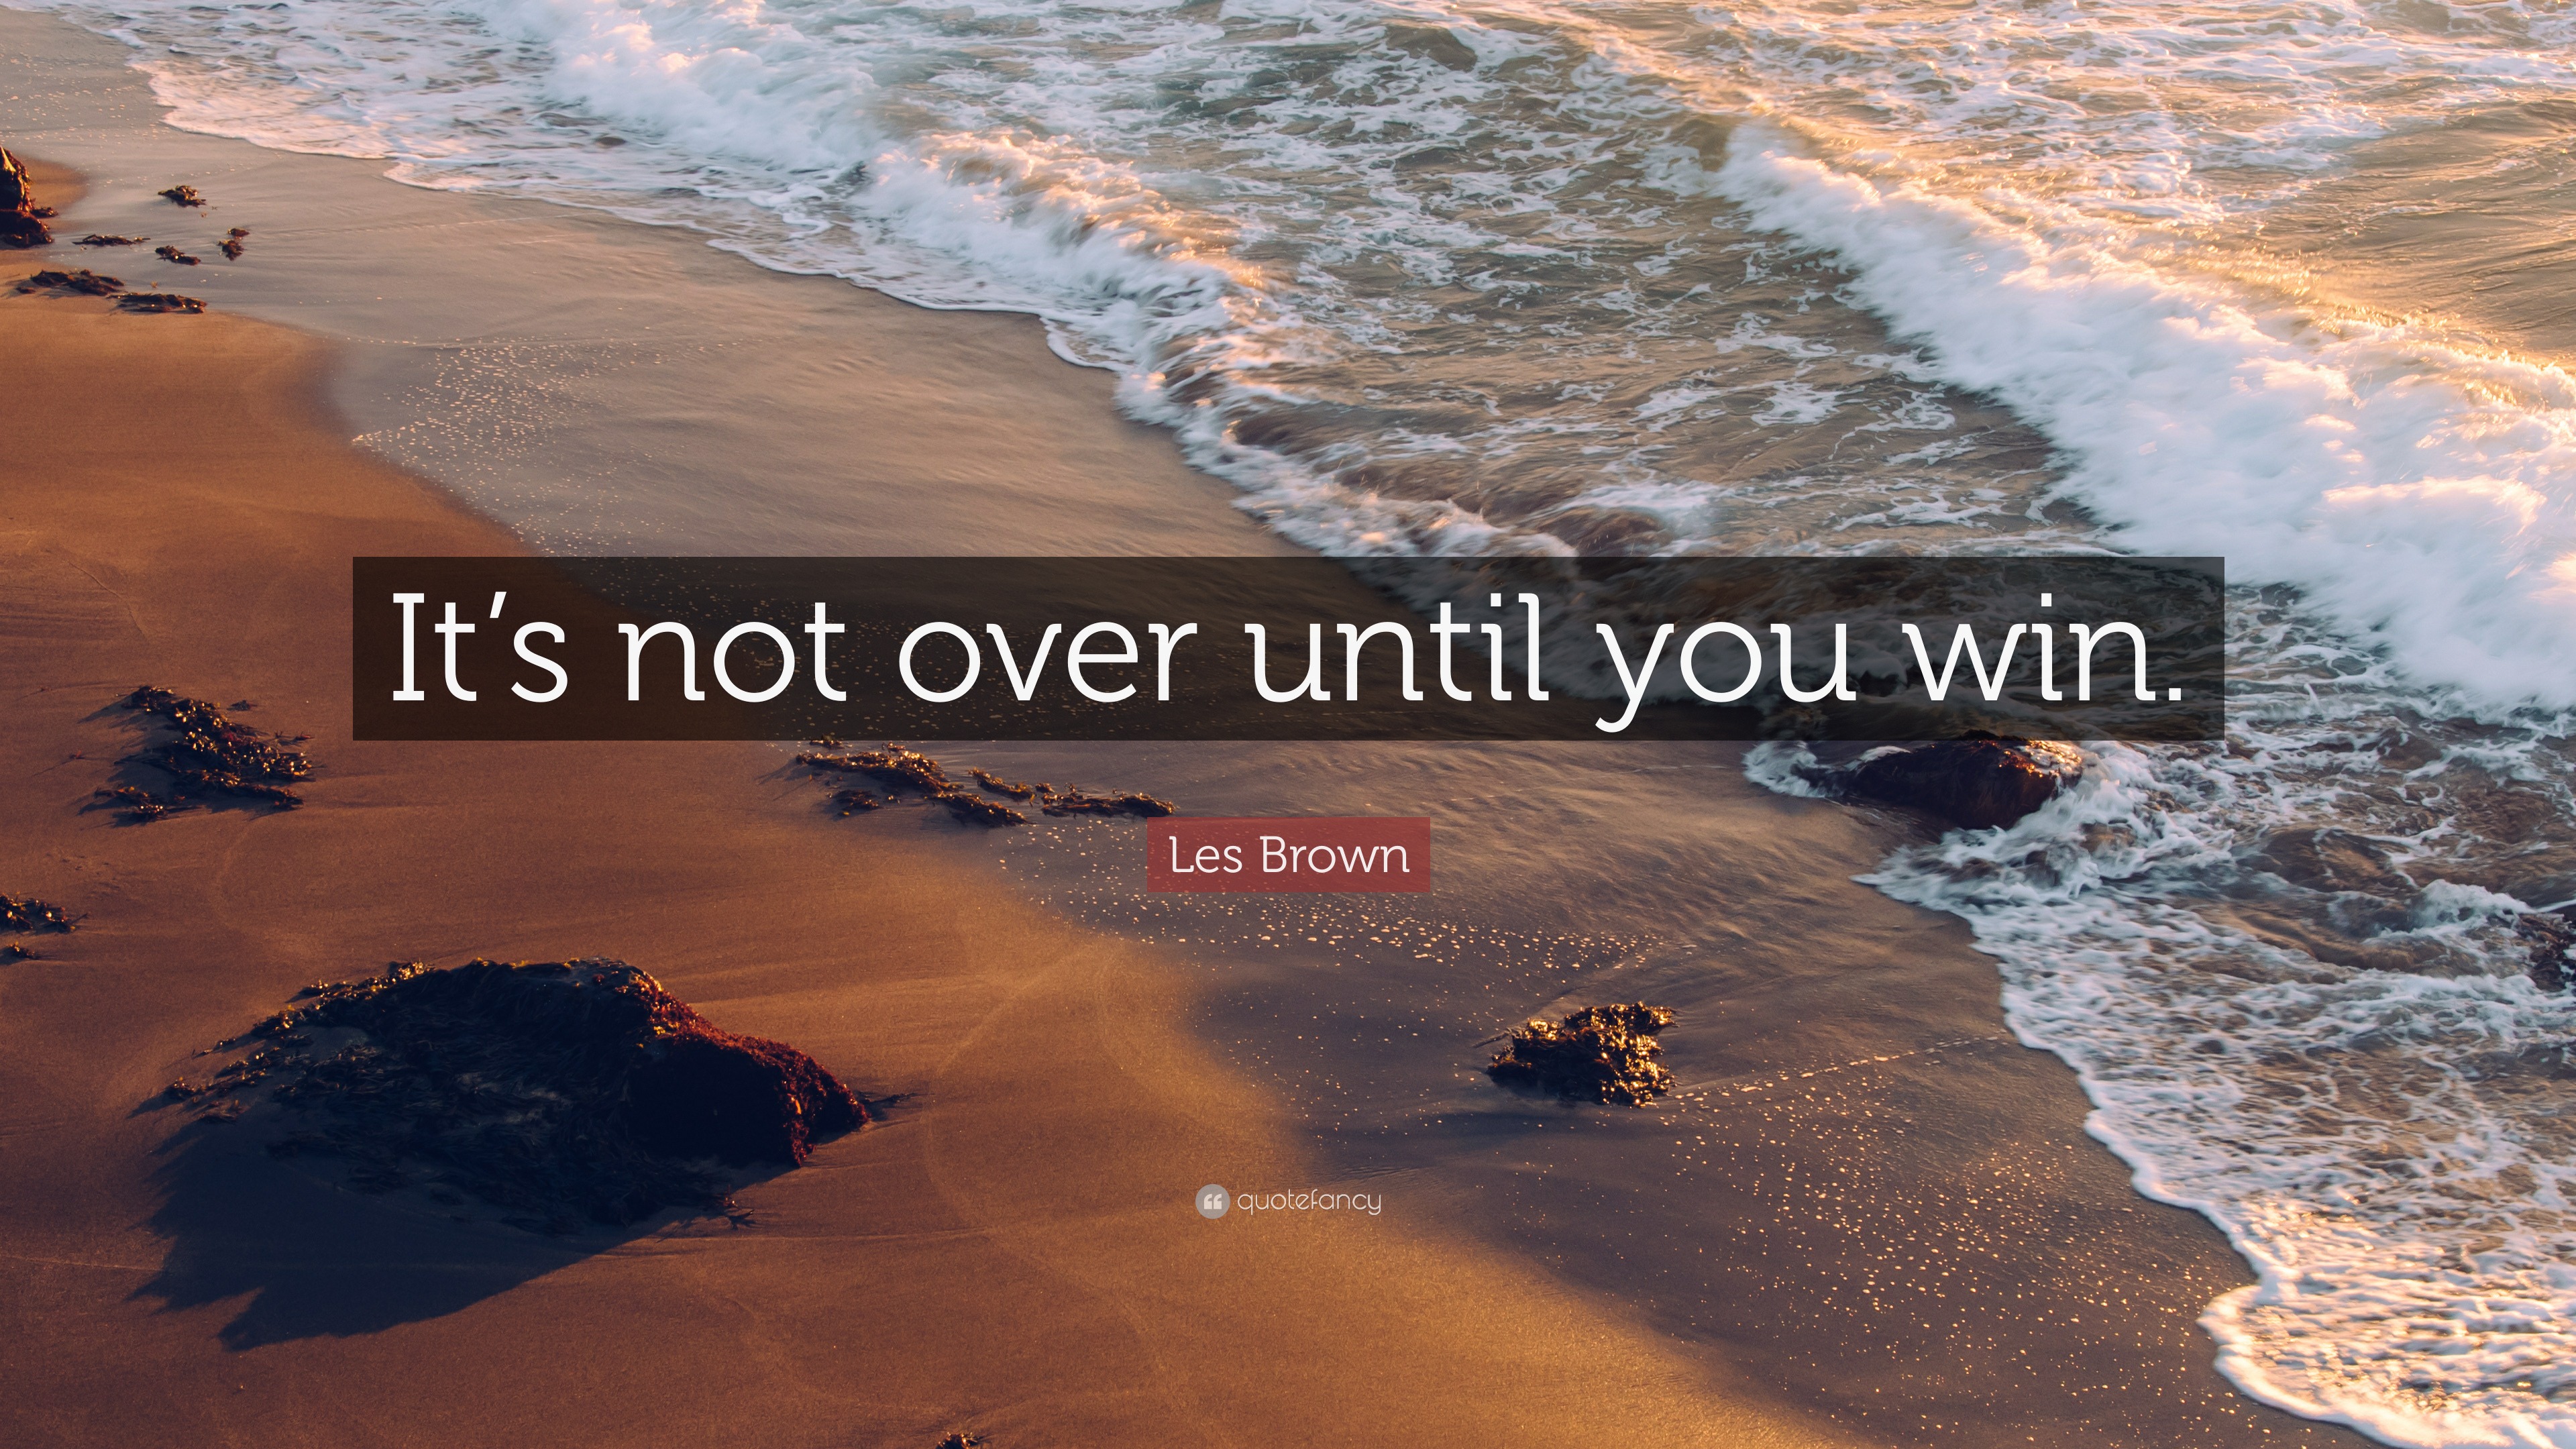 Les Brown Quote: “It's not over until you win.”